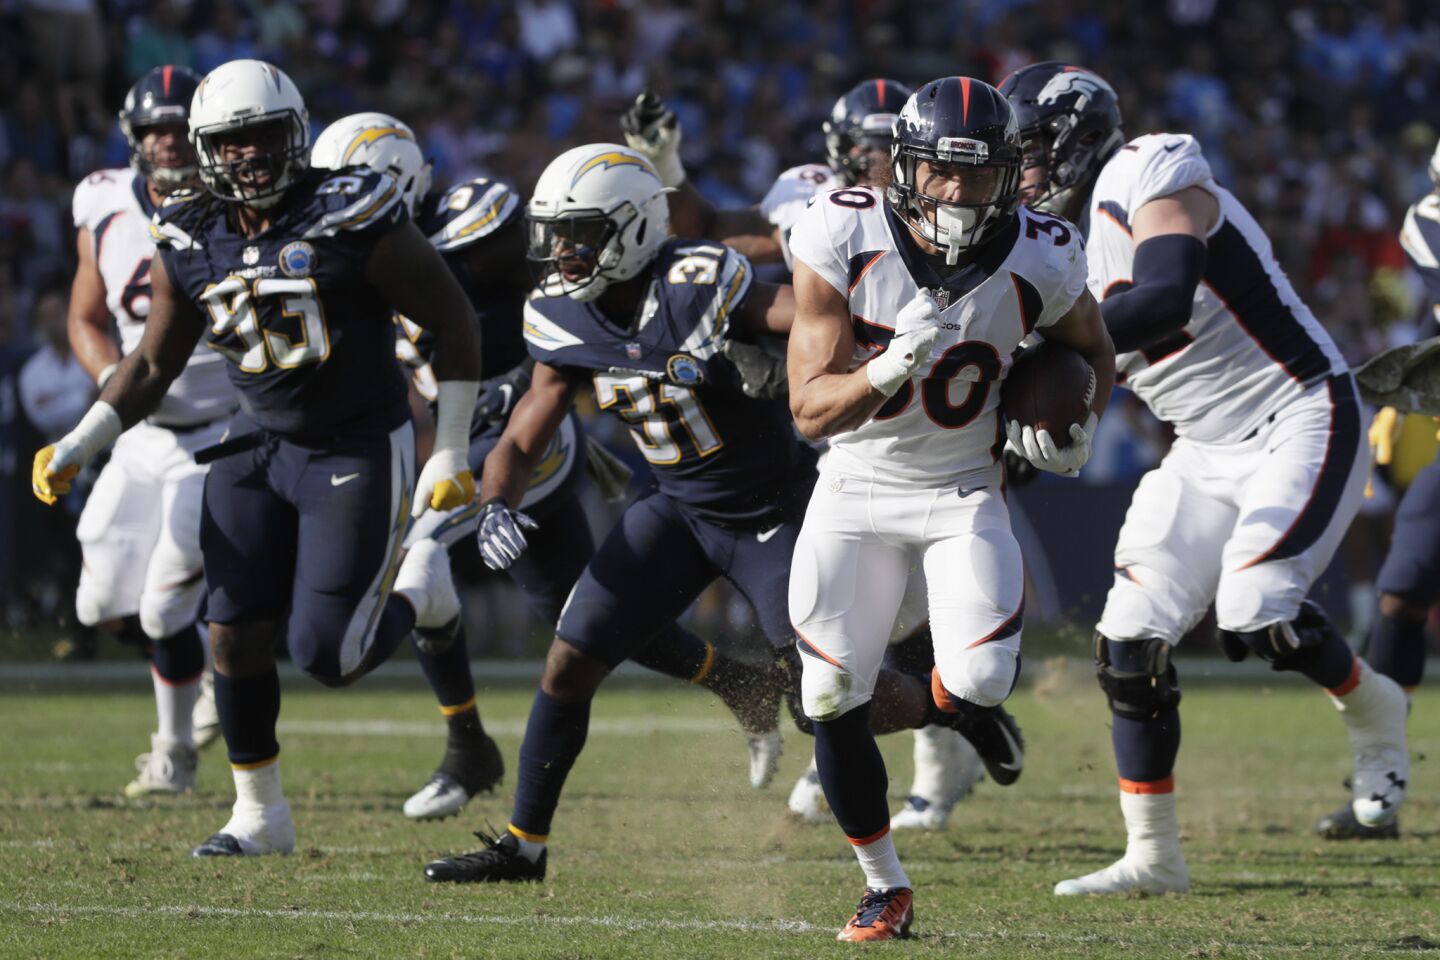 Denver Broncos running back Phillip Lindsay speeds past the Chargers defense for a long first half touchdown run at Stubhub Center on Sunday.